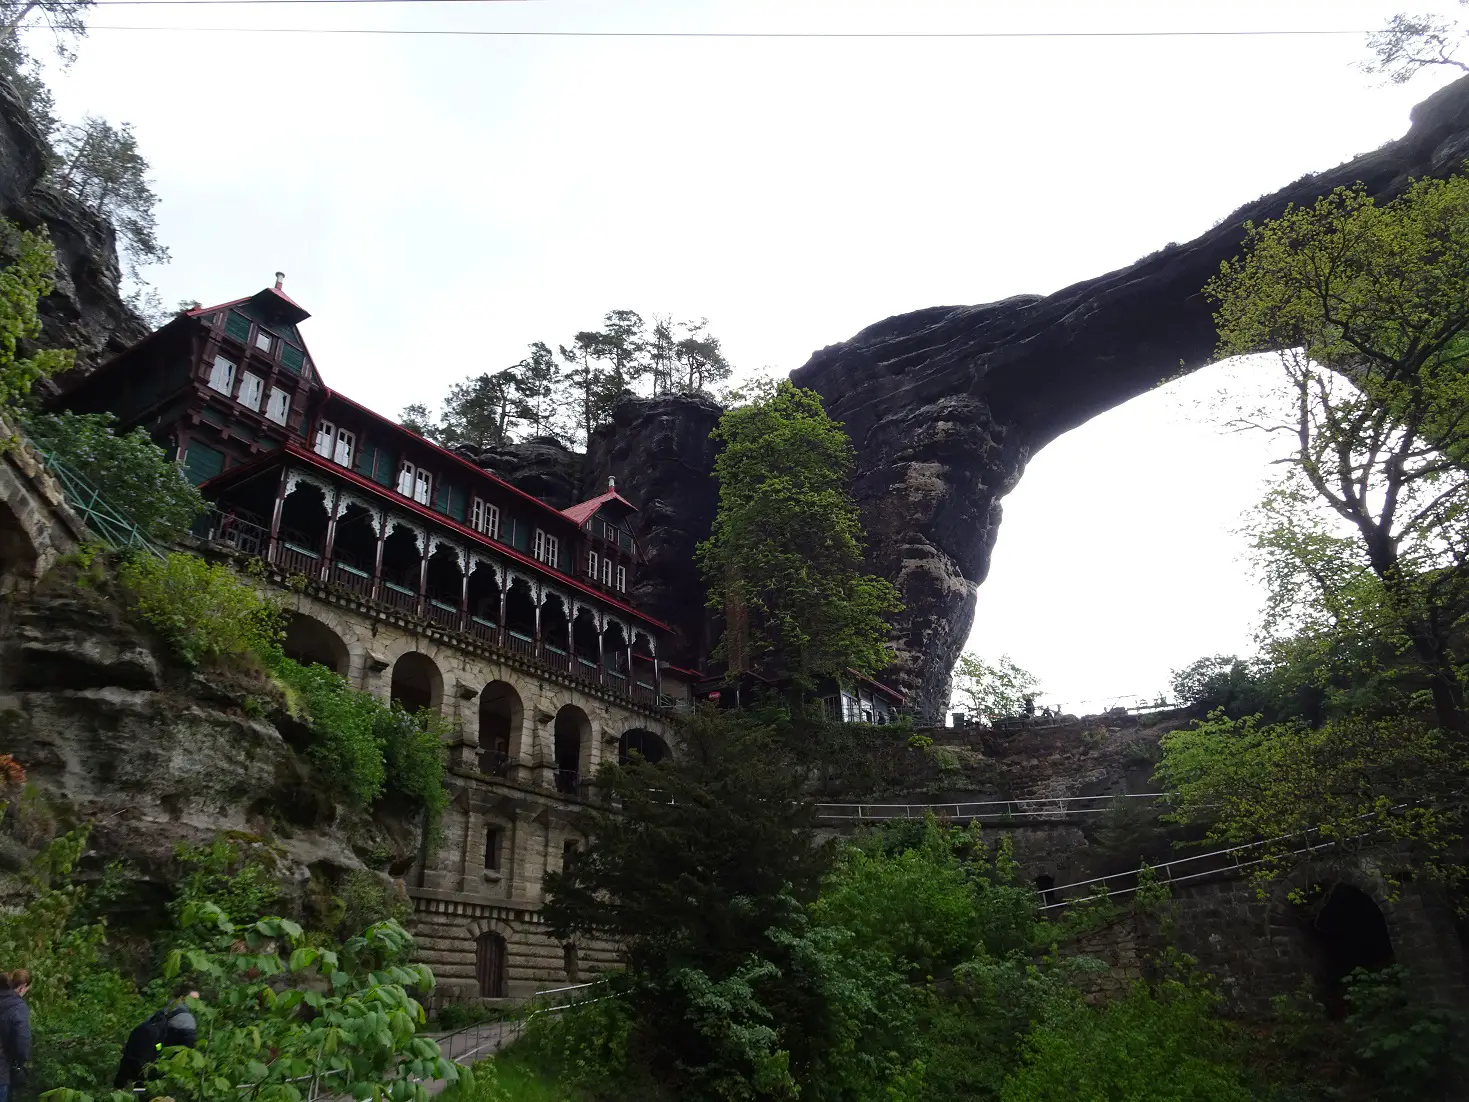 A wooden house under a Stone Arch in the Bohemian Switzerland